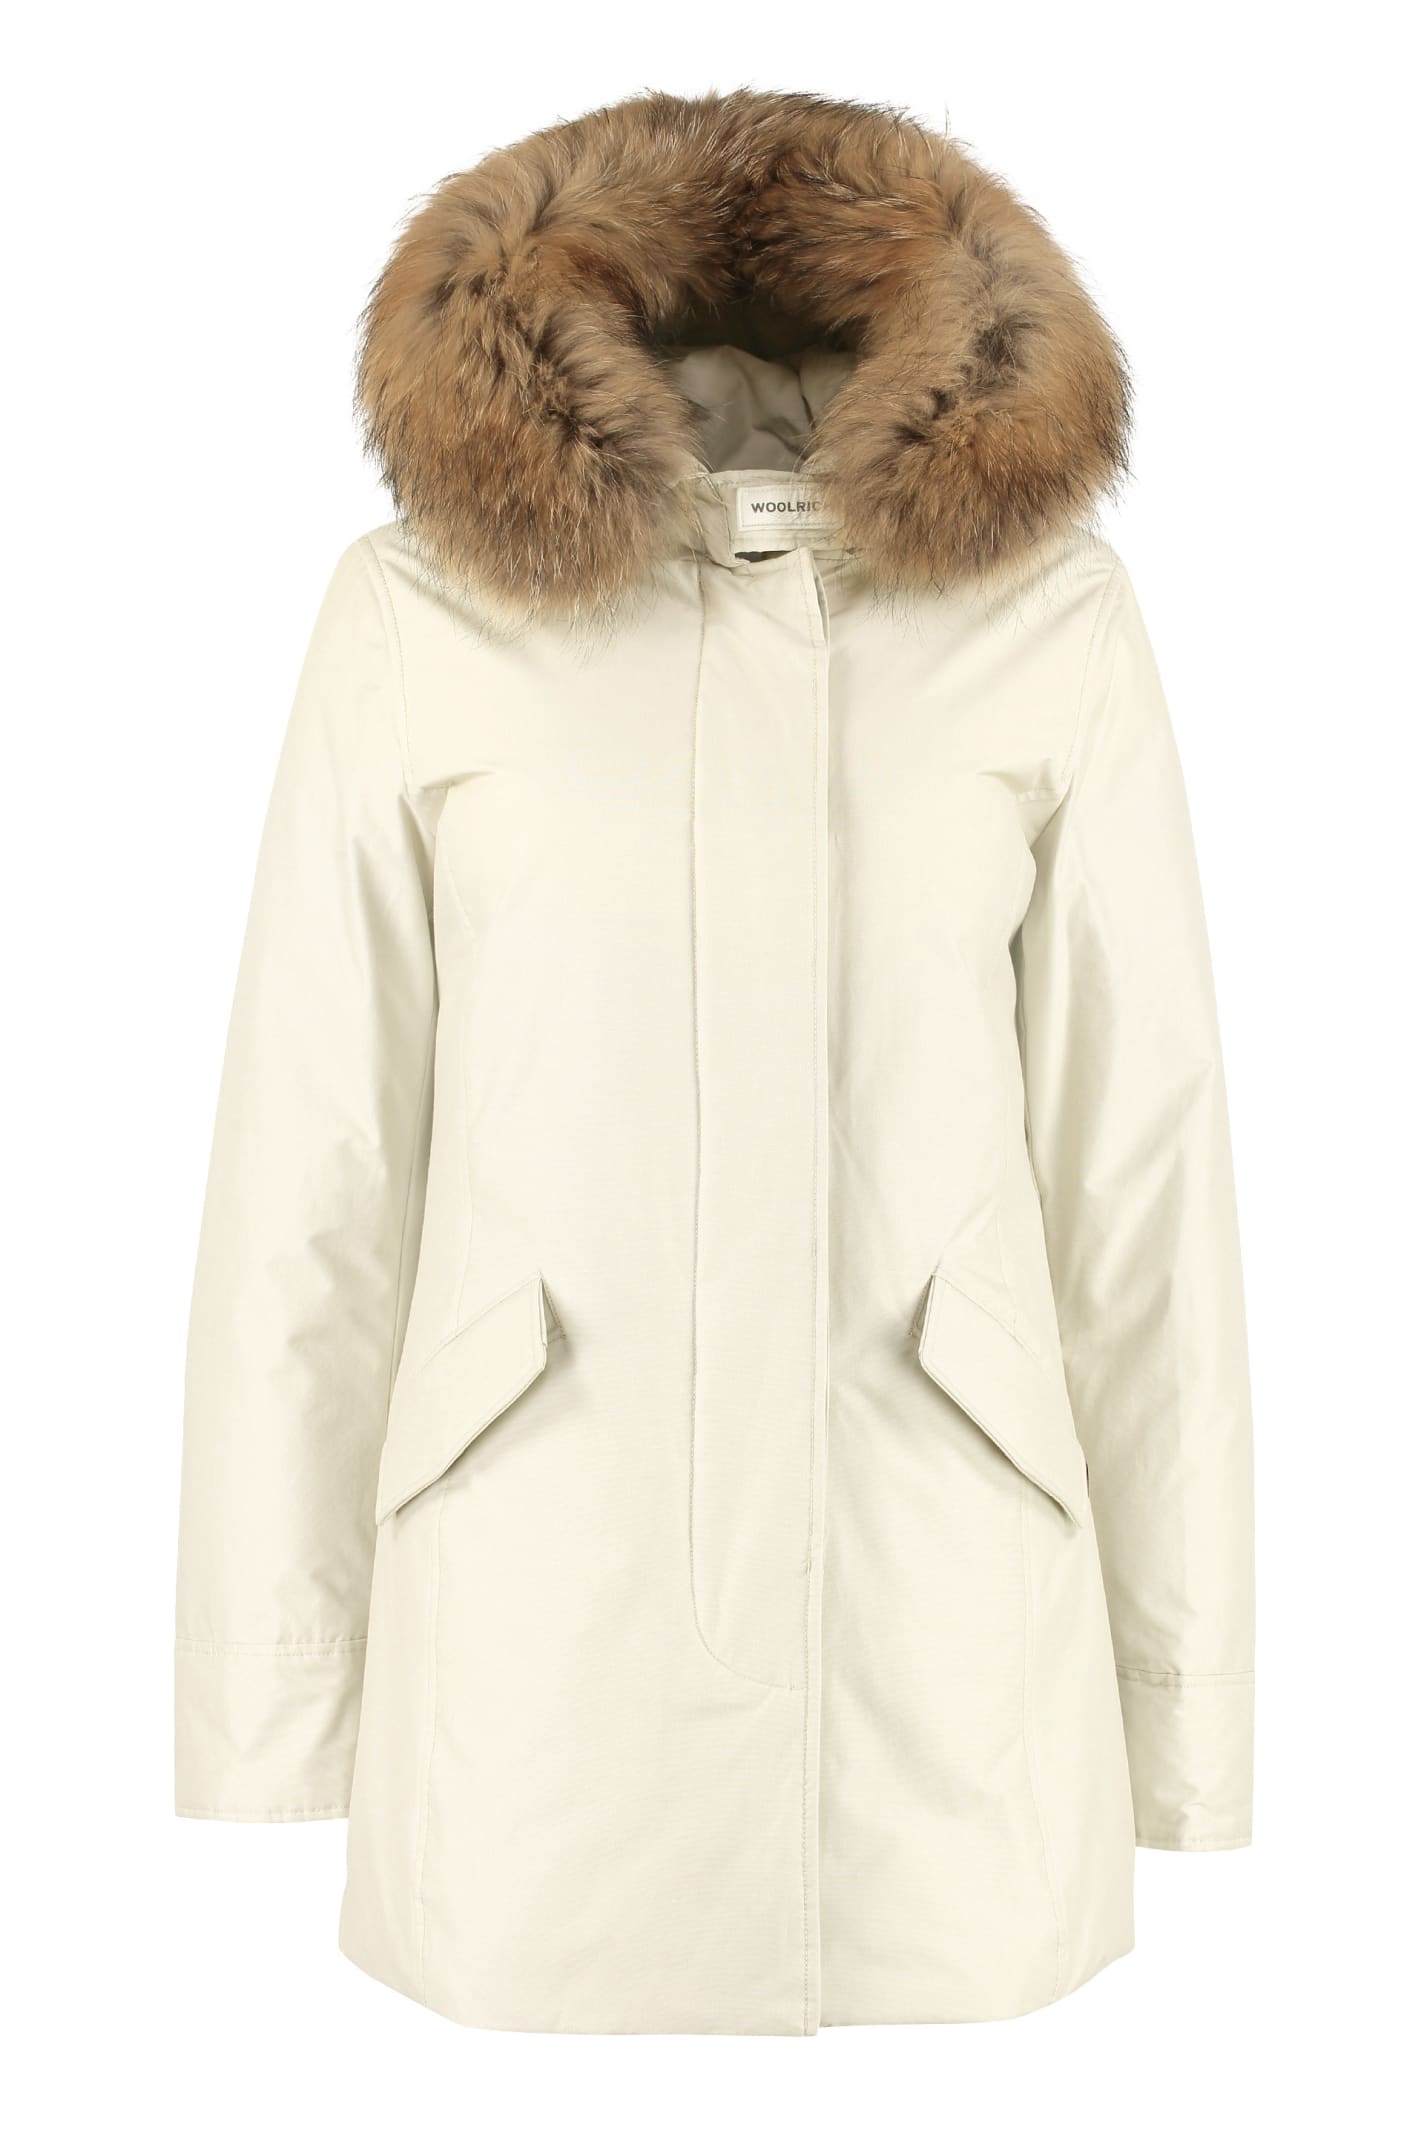 Woolrich Arctic Padded Parka With Fur Hood In Beige